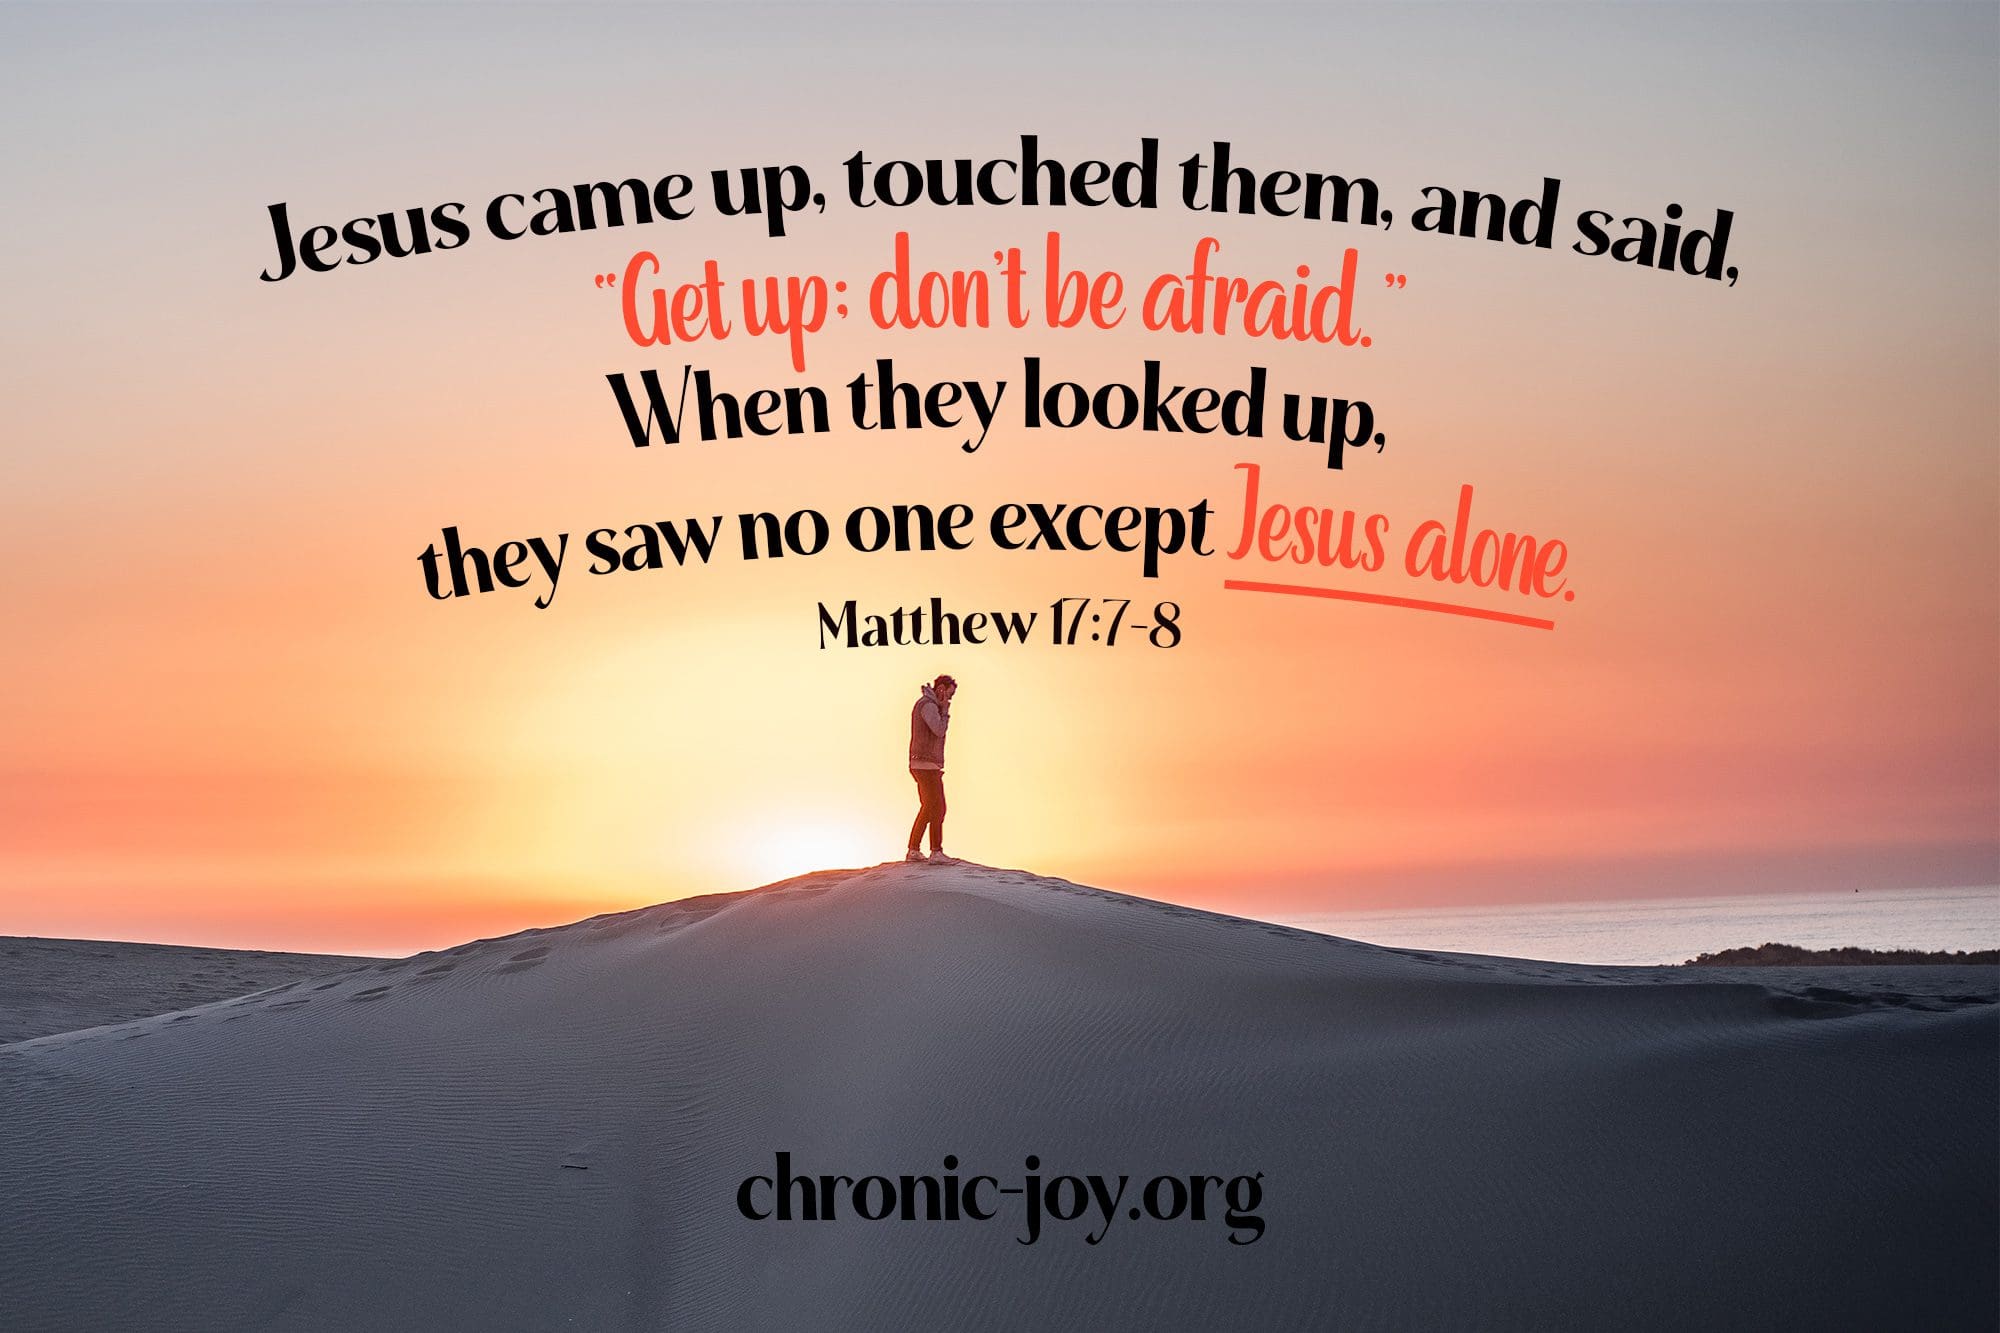 "Jesus came up, touched them, and said,'Get up: don't be afraid.' When they looked up, they saw no one except Jesus alone." Matthew 17:7-8